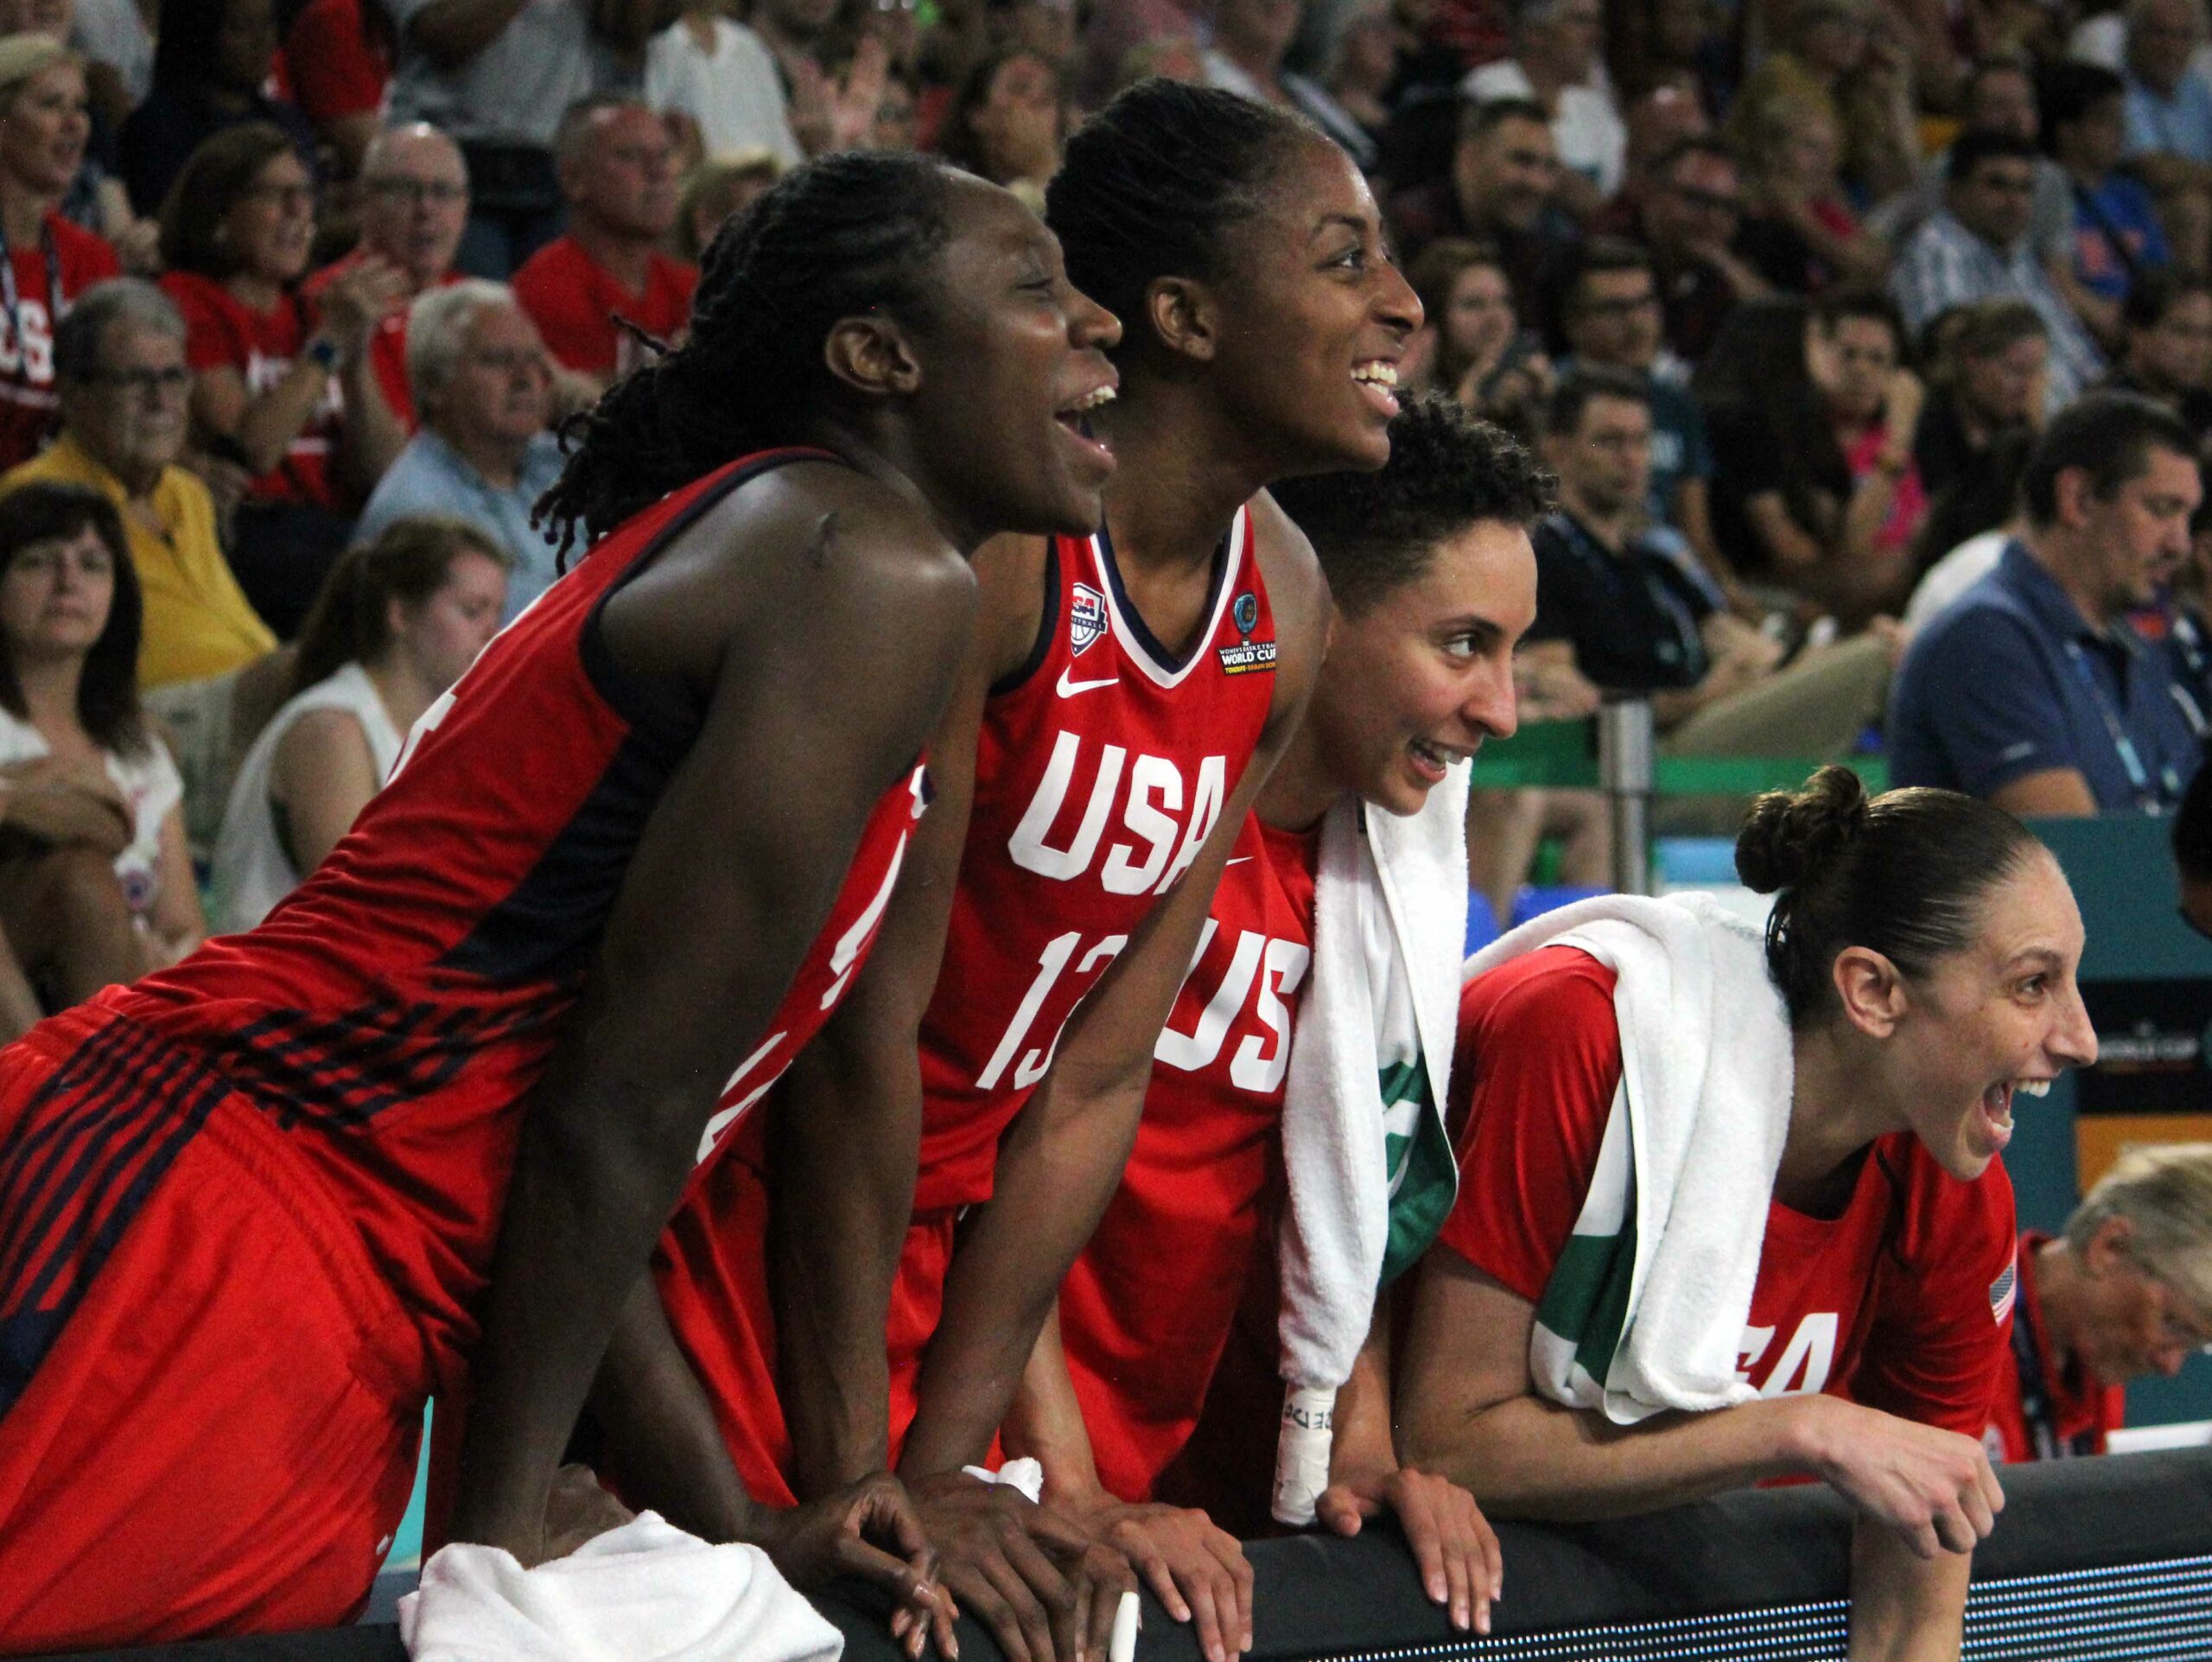 How long can the USA hang on to the top spot in women’s basketball?